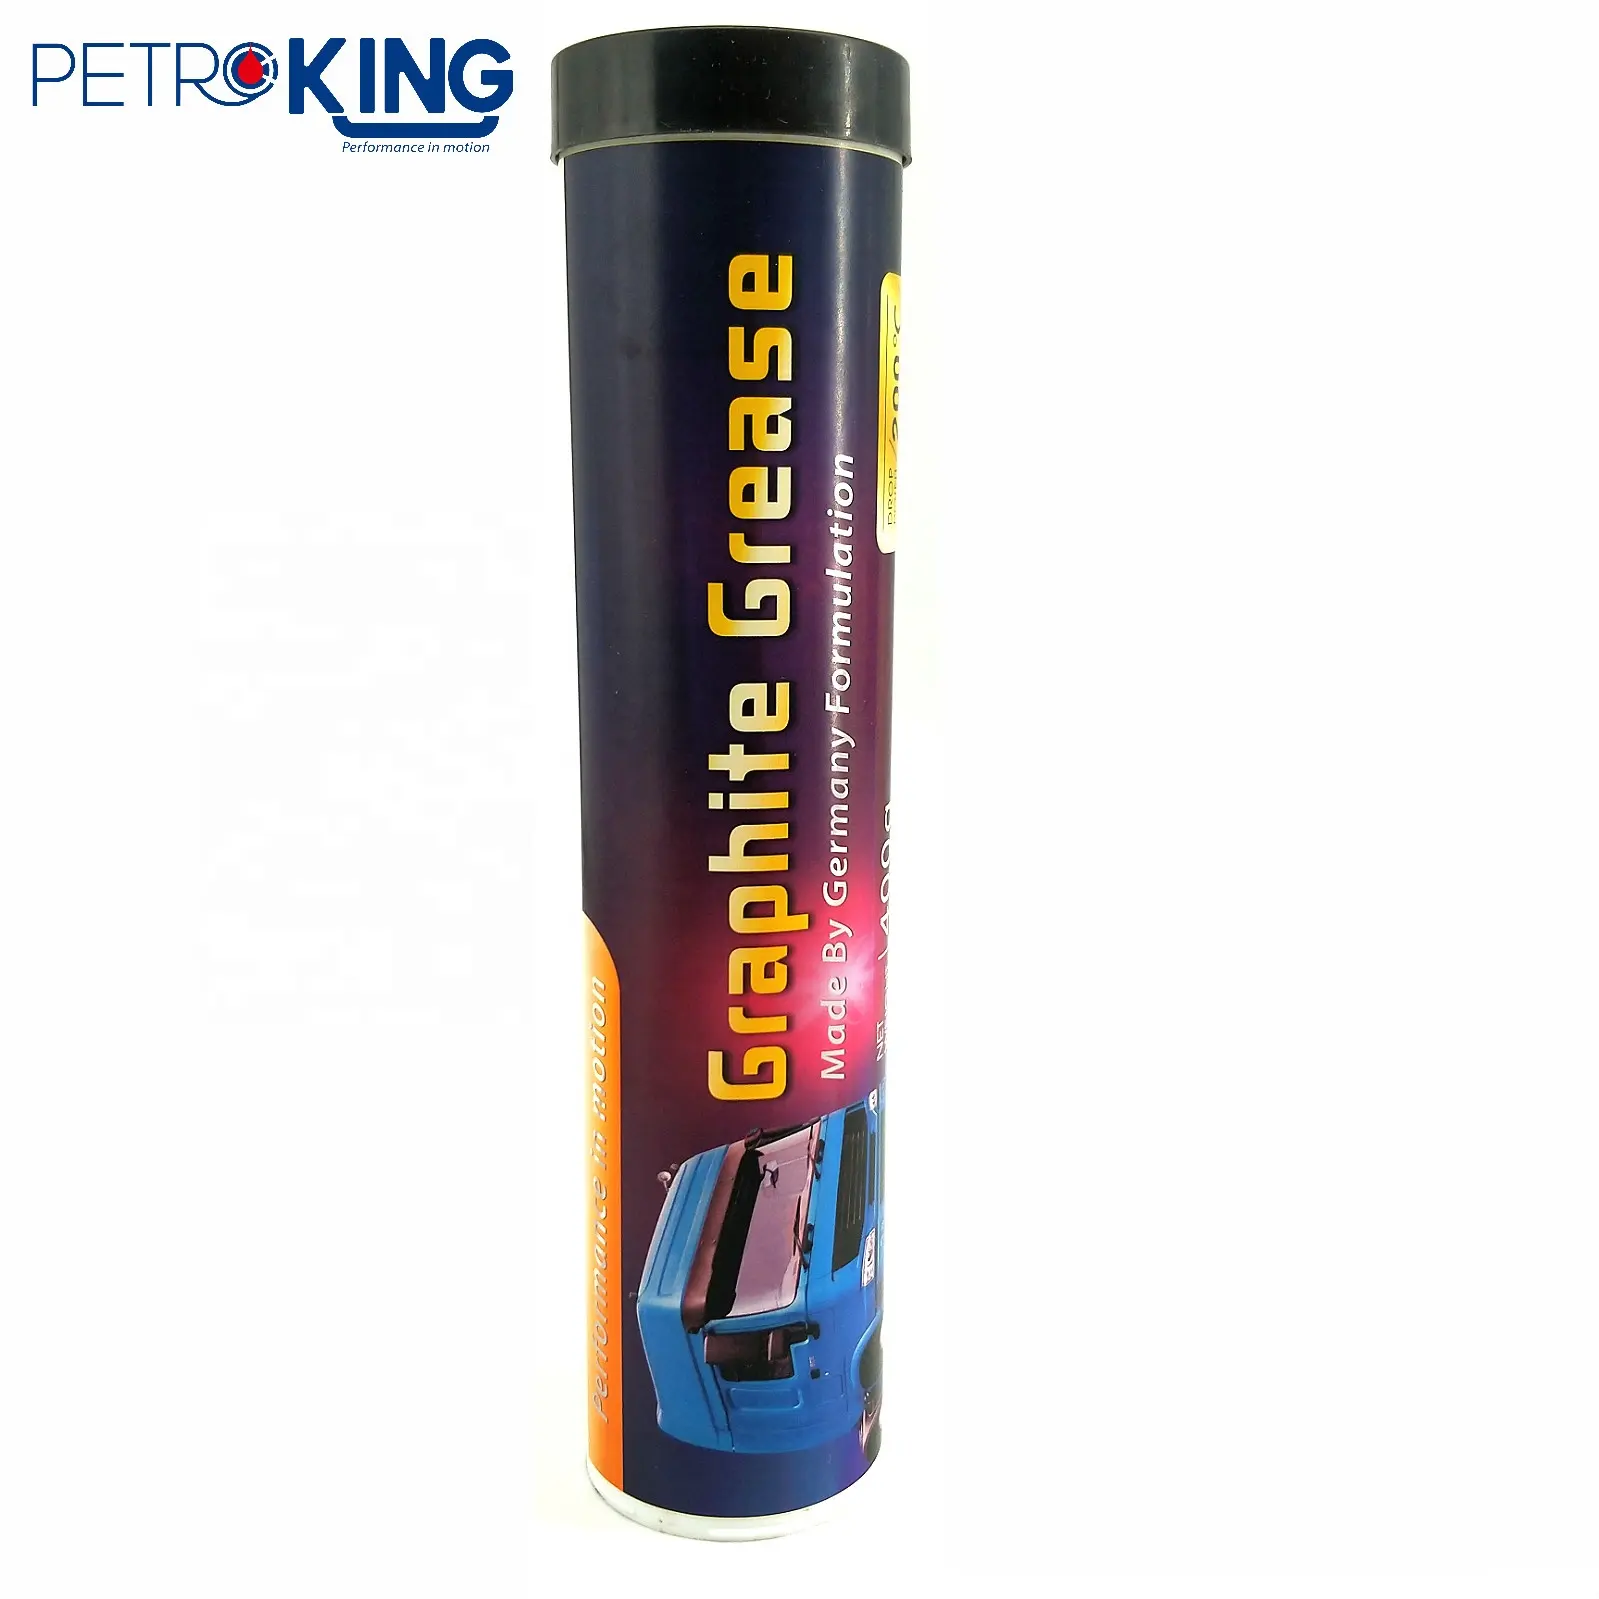 PETROKING black lithium grease in 400g cartridge graphite molykote grease price